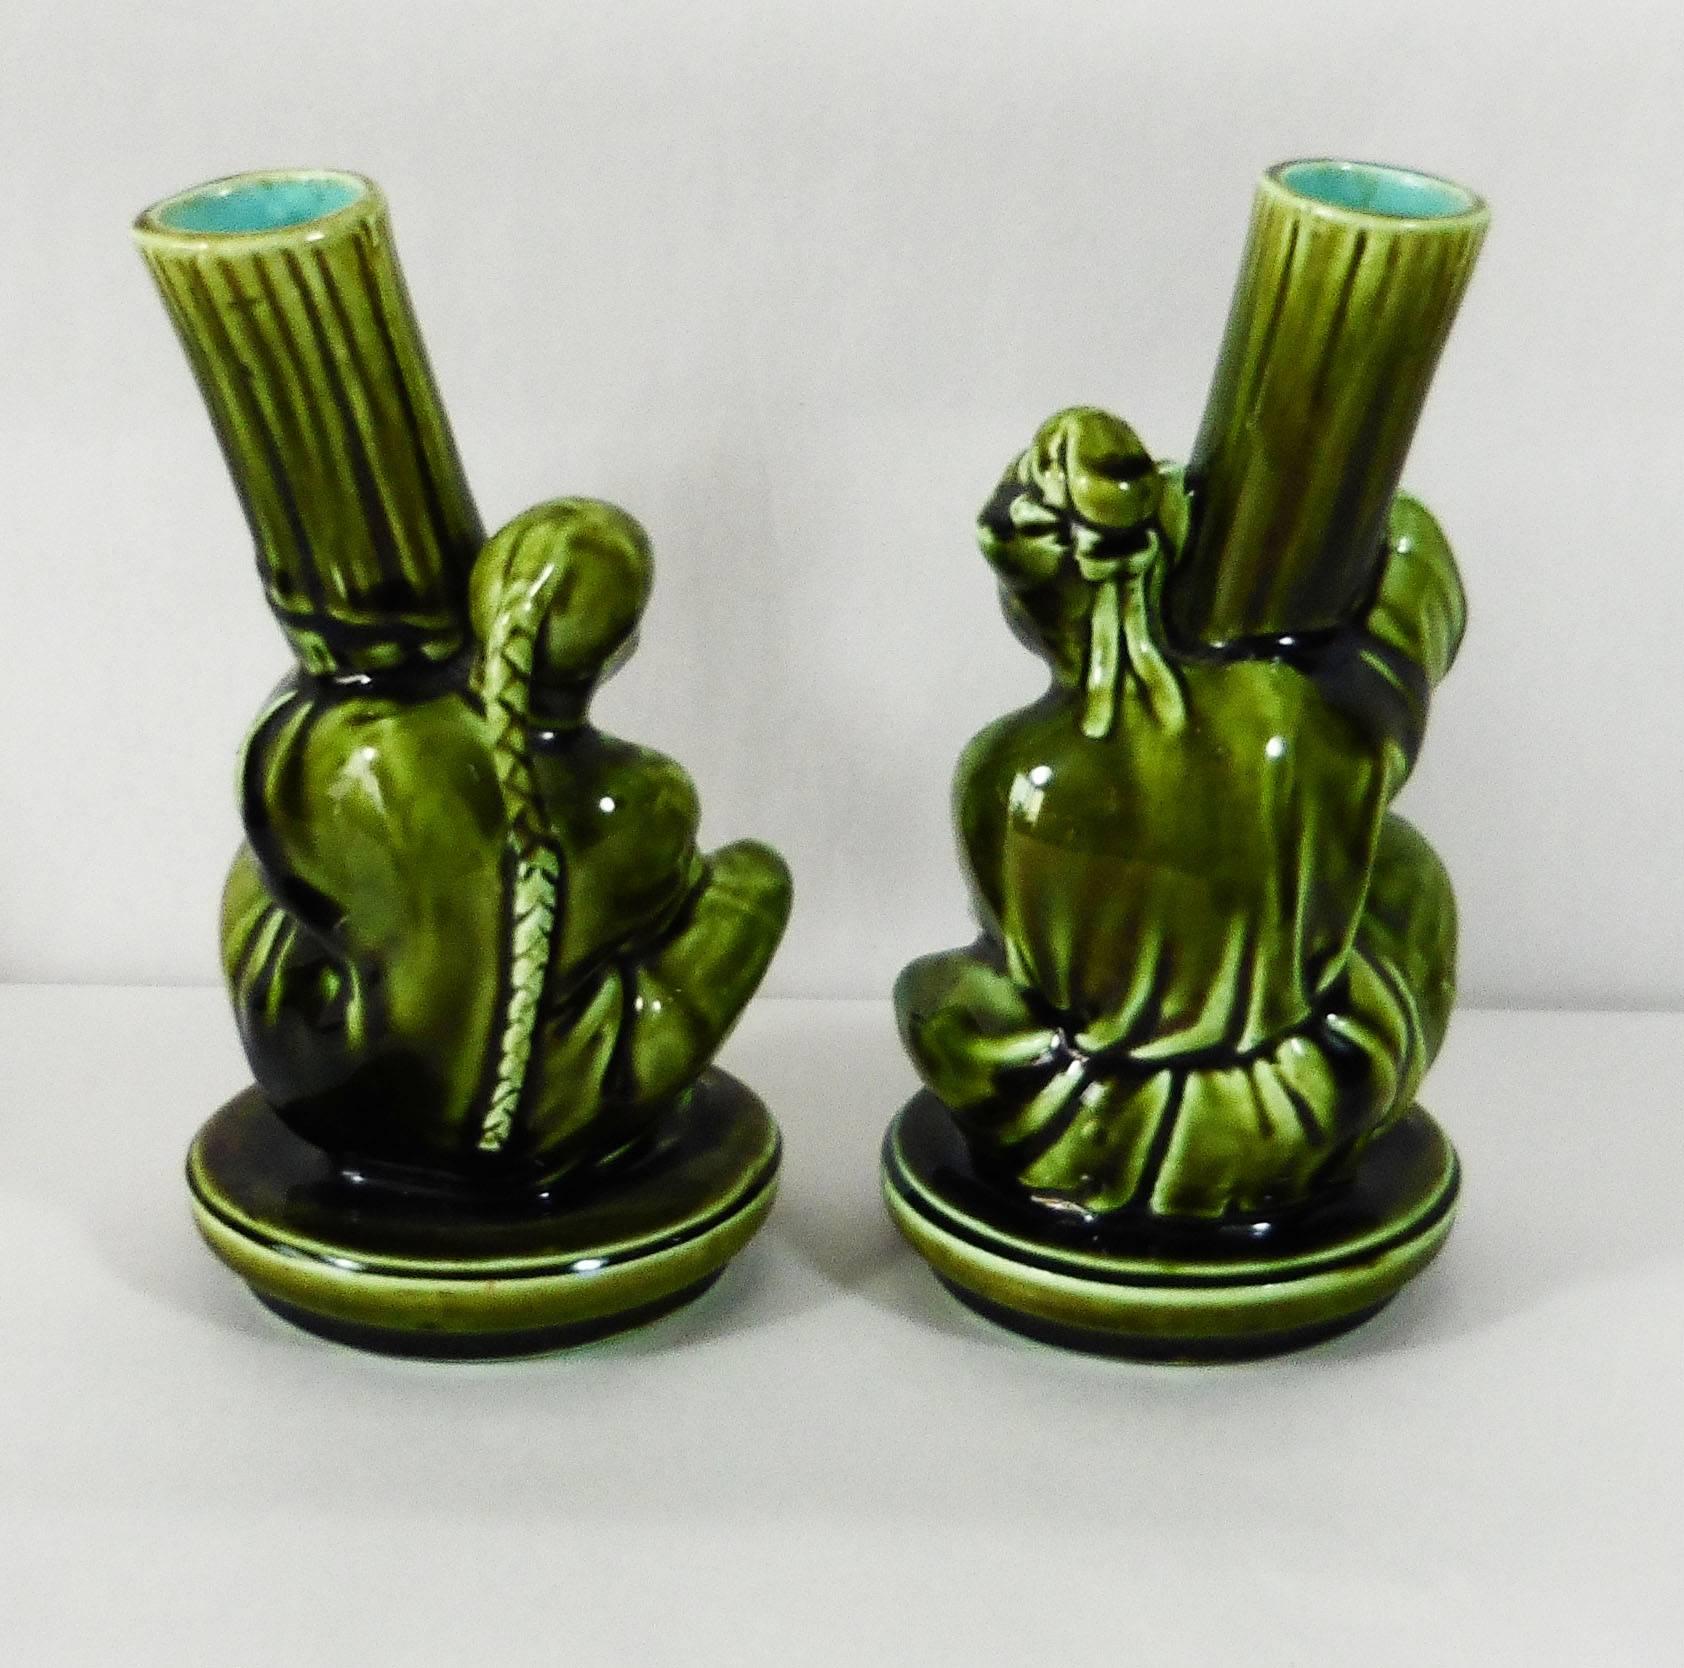 Antique green Majolica pair of Japonese or Chinese women and man holding bambou vases signed Sarreguemines Majolica, circa 1870.
Early French Majolica inspired by the Art movement Japonism of the end of 19th century.